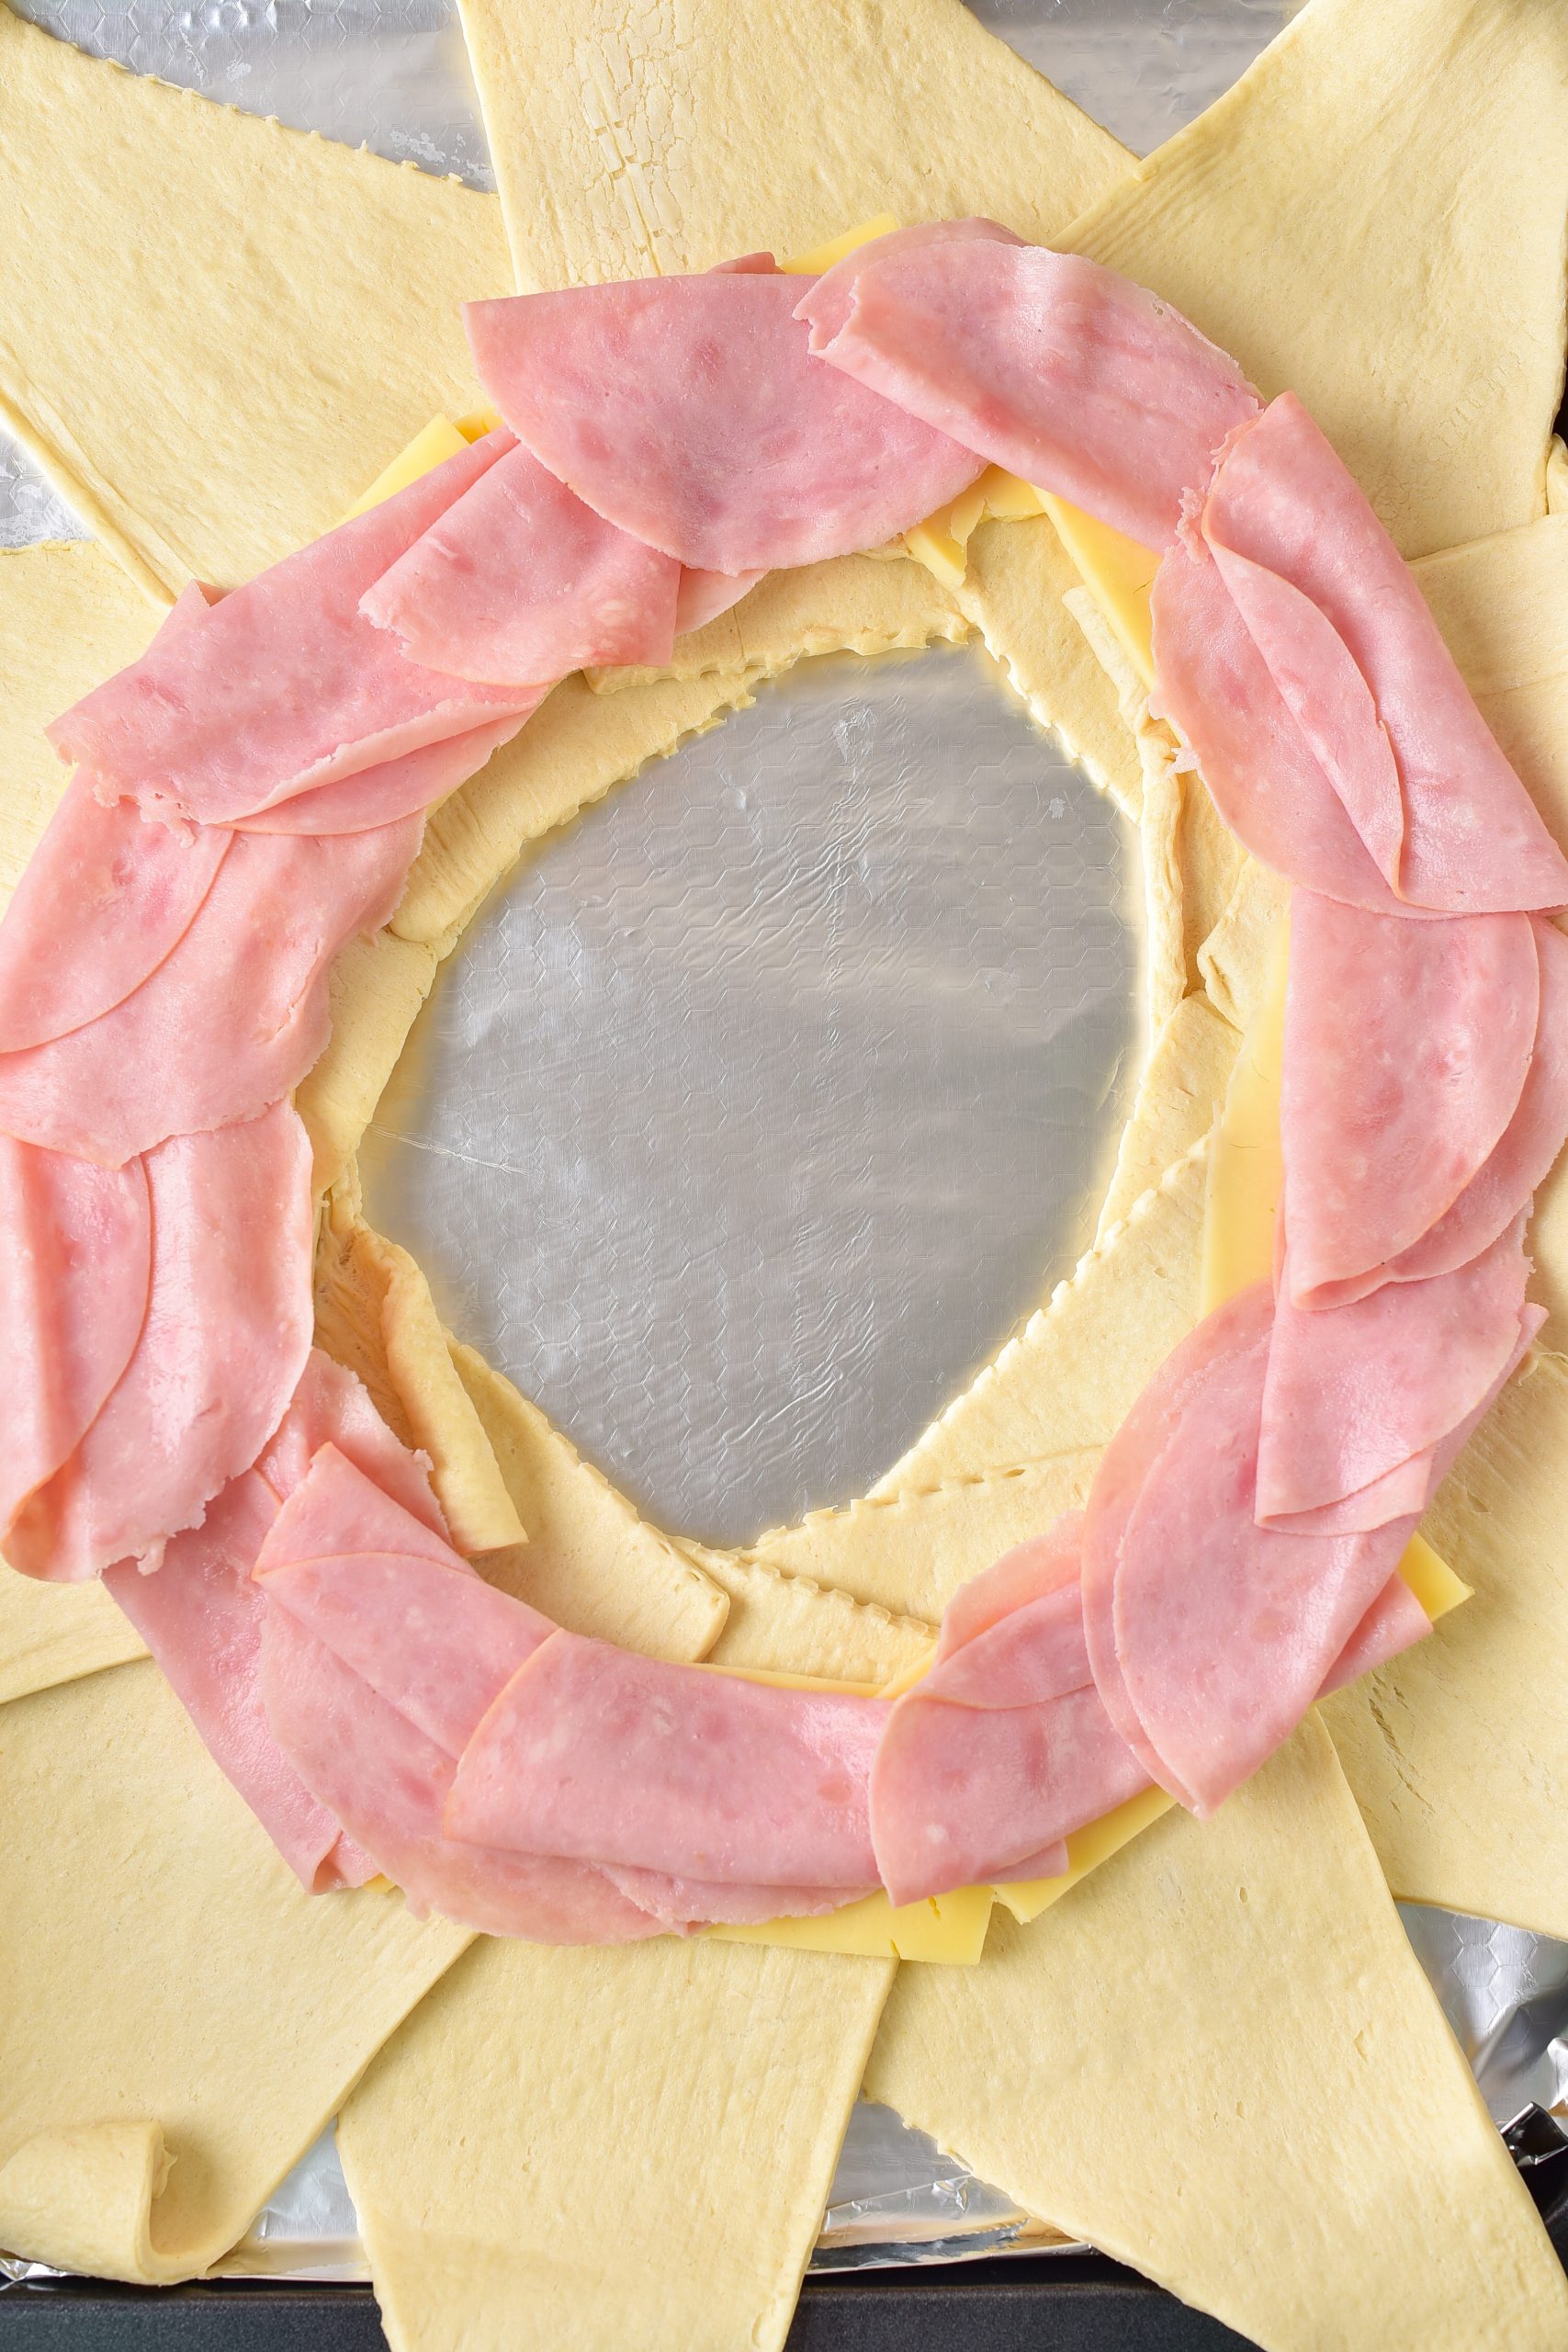 Top the cheese with the salami.